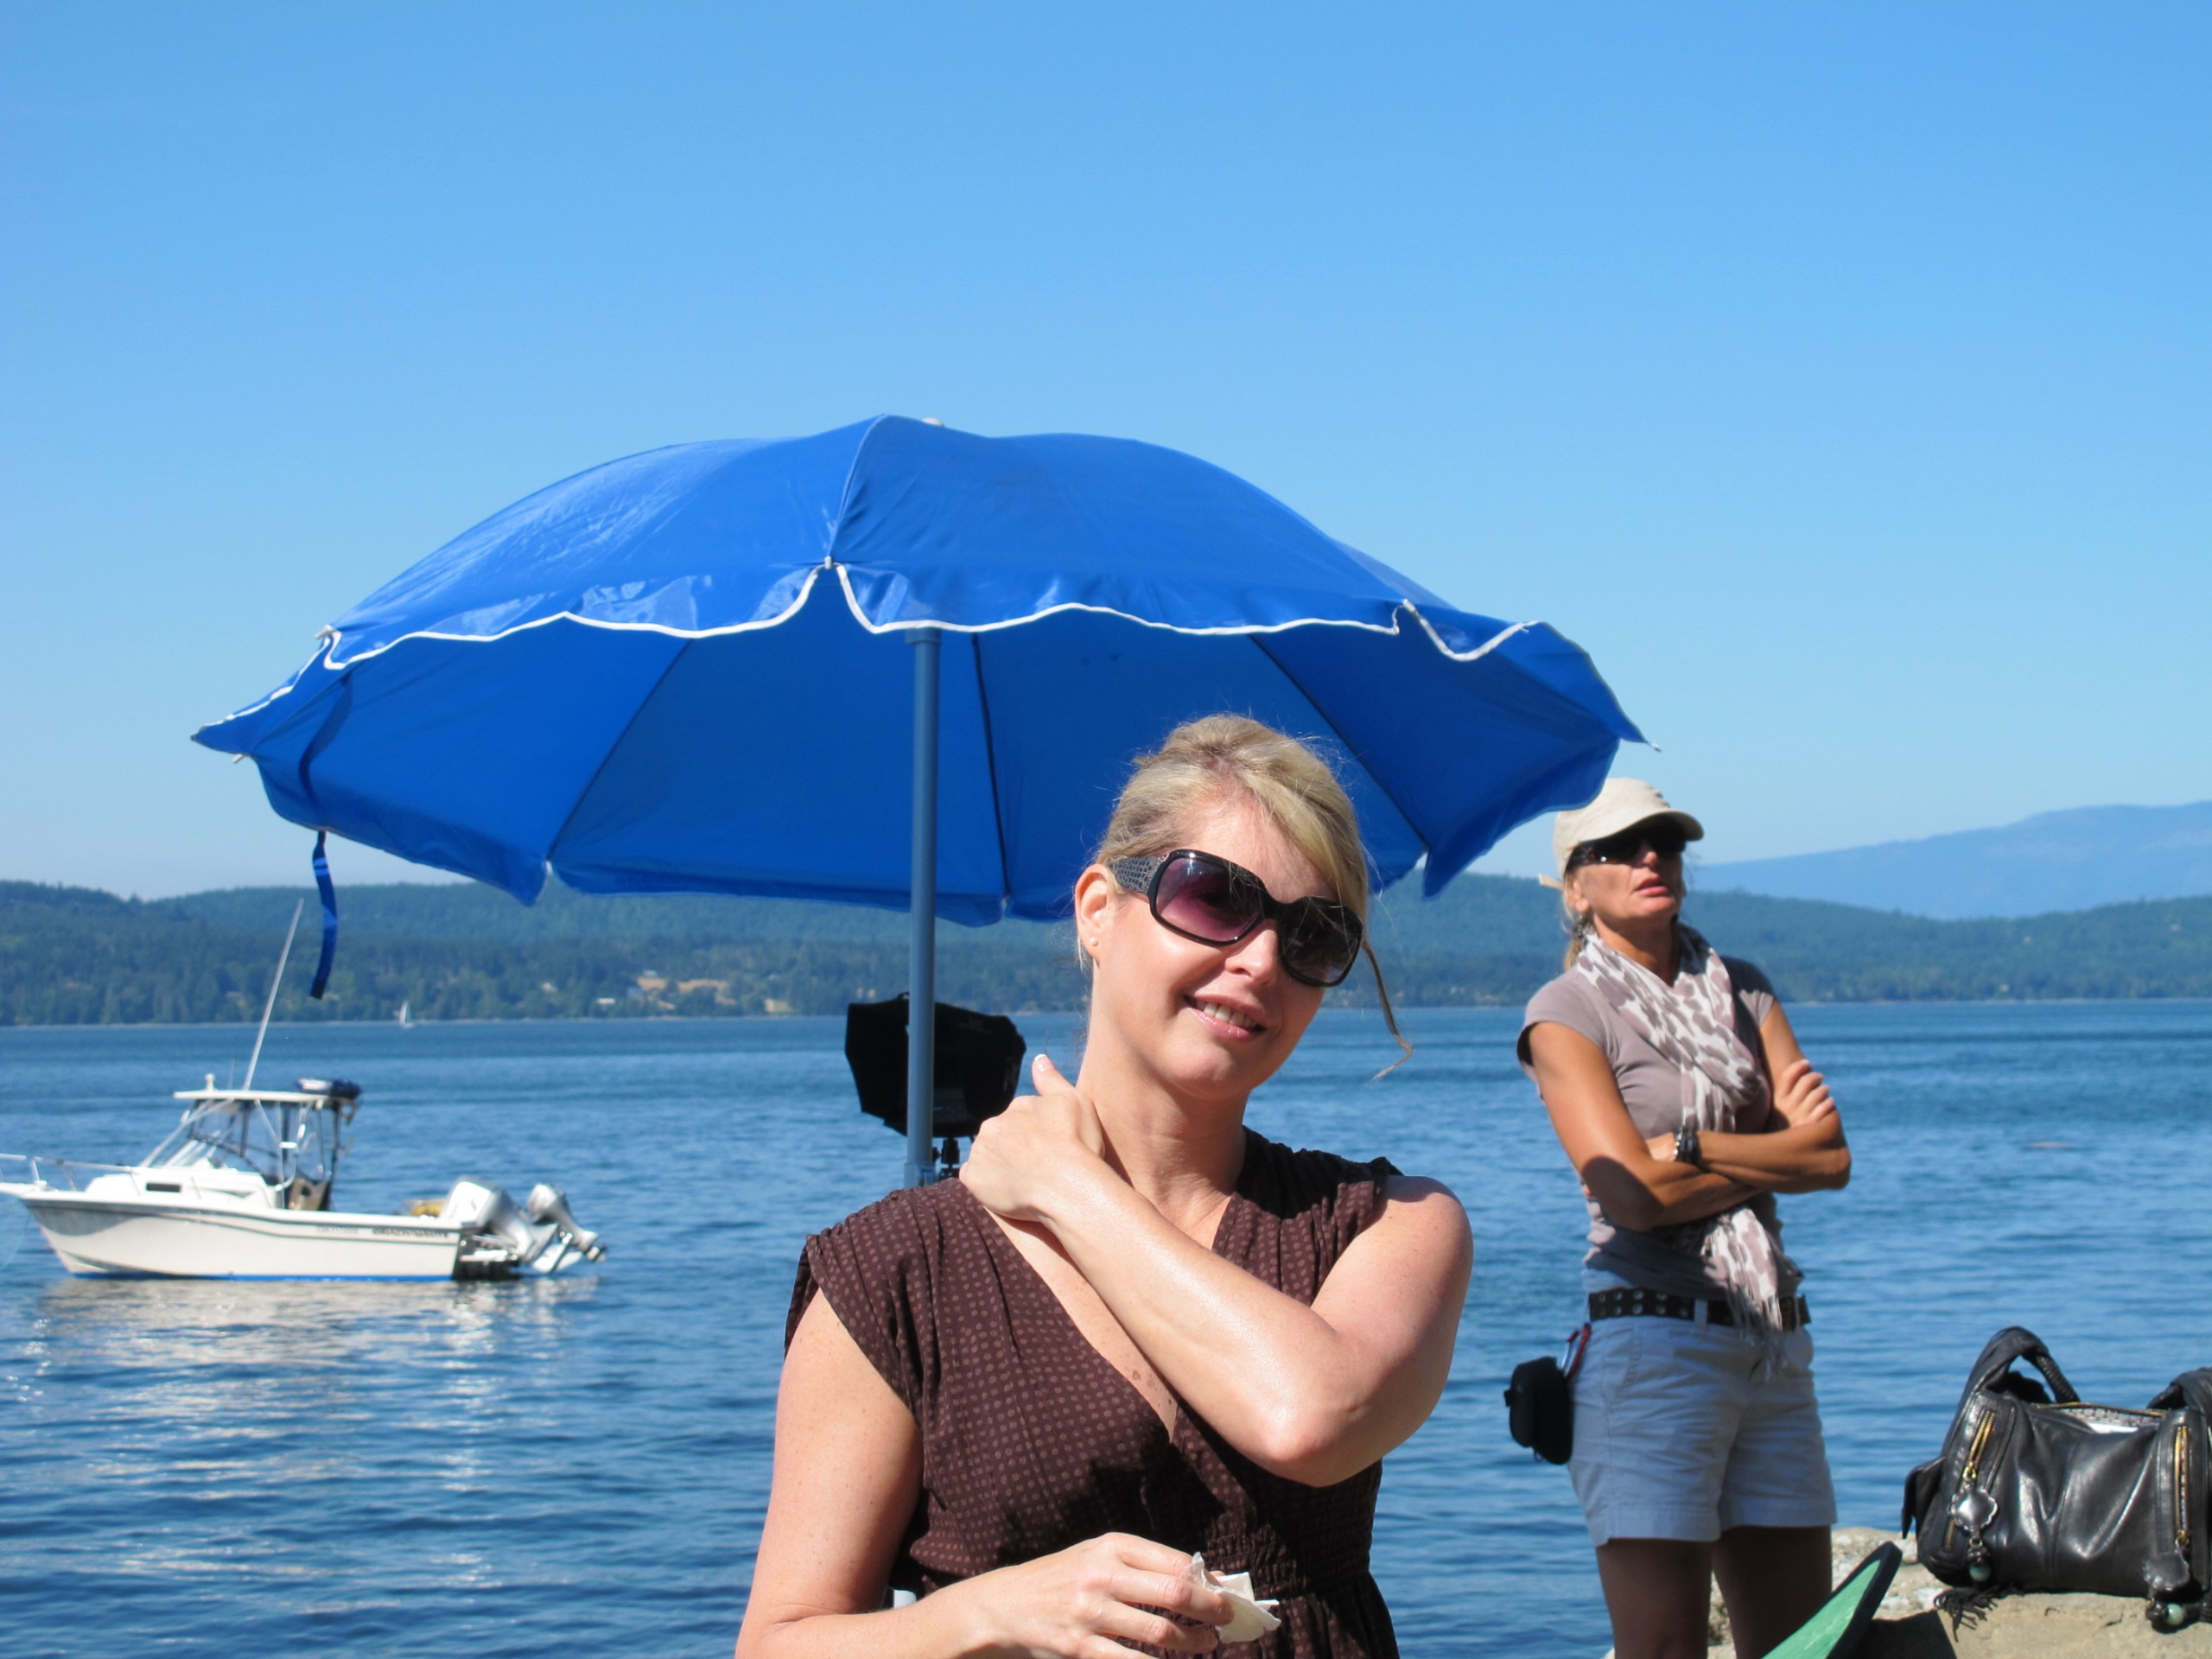 Erica Bulman applying sunscreen to preserve continuity during the shooting of the 2010 feature film Soufflé au Chocolat